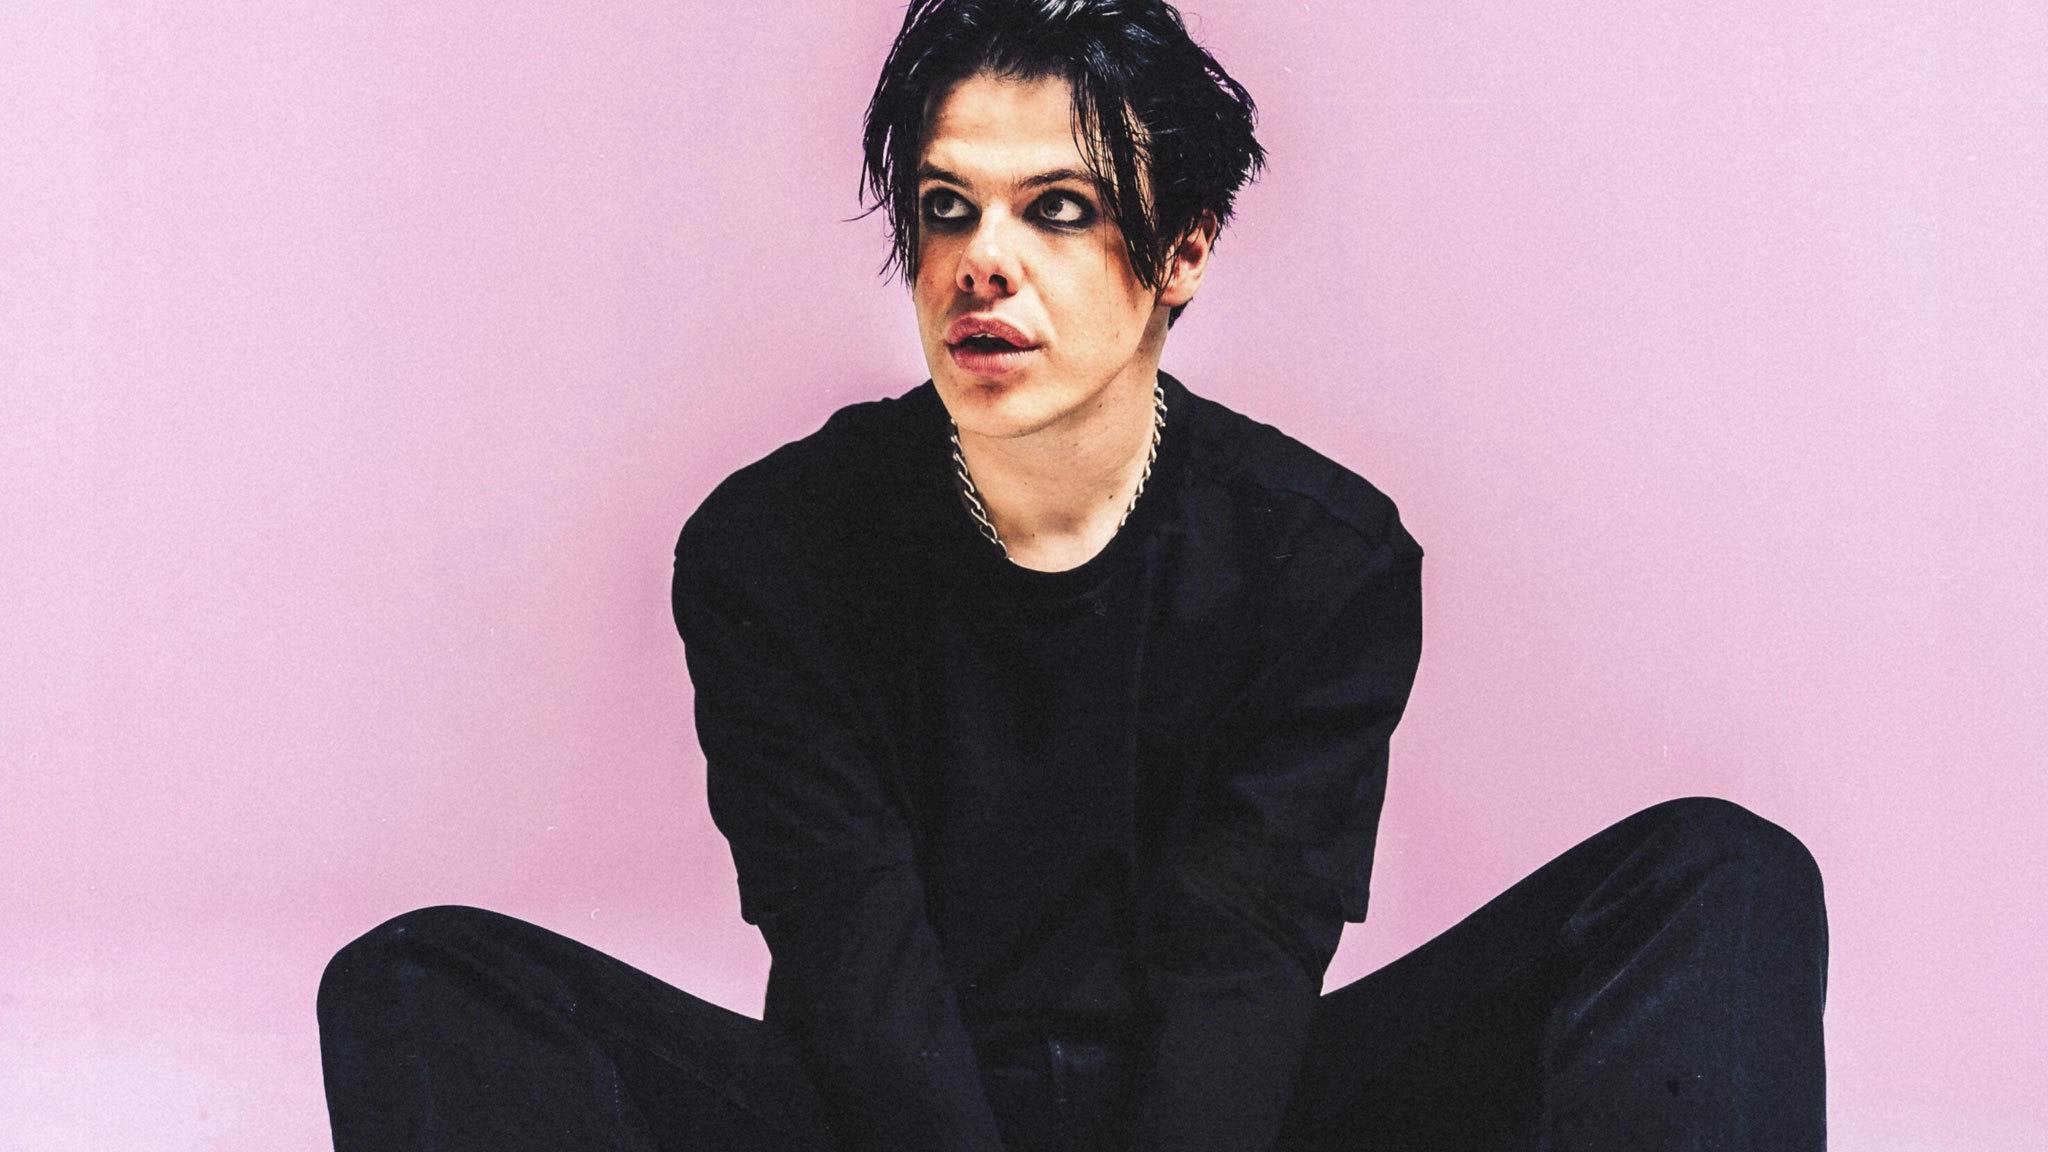 YUNGBLUD to play one-off Eden Sessions show this summer